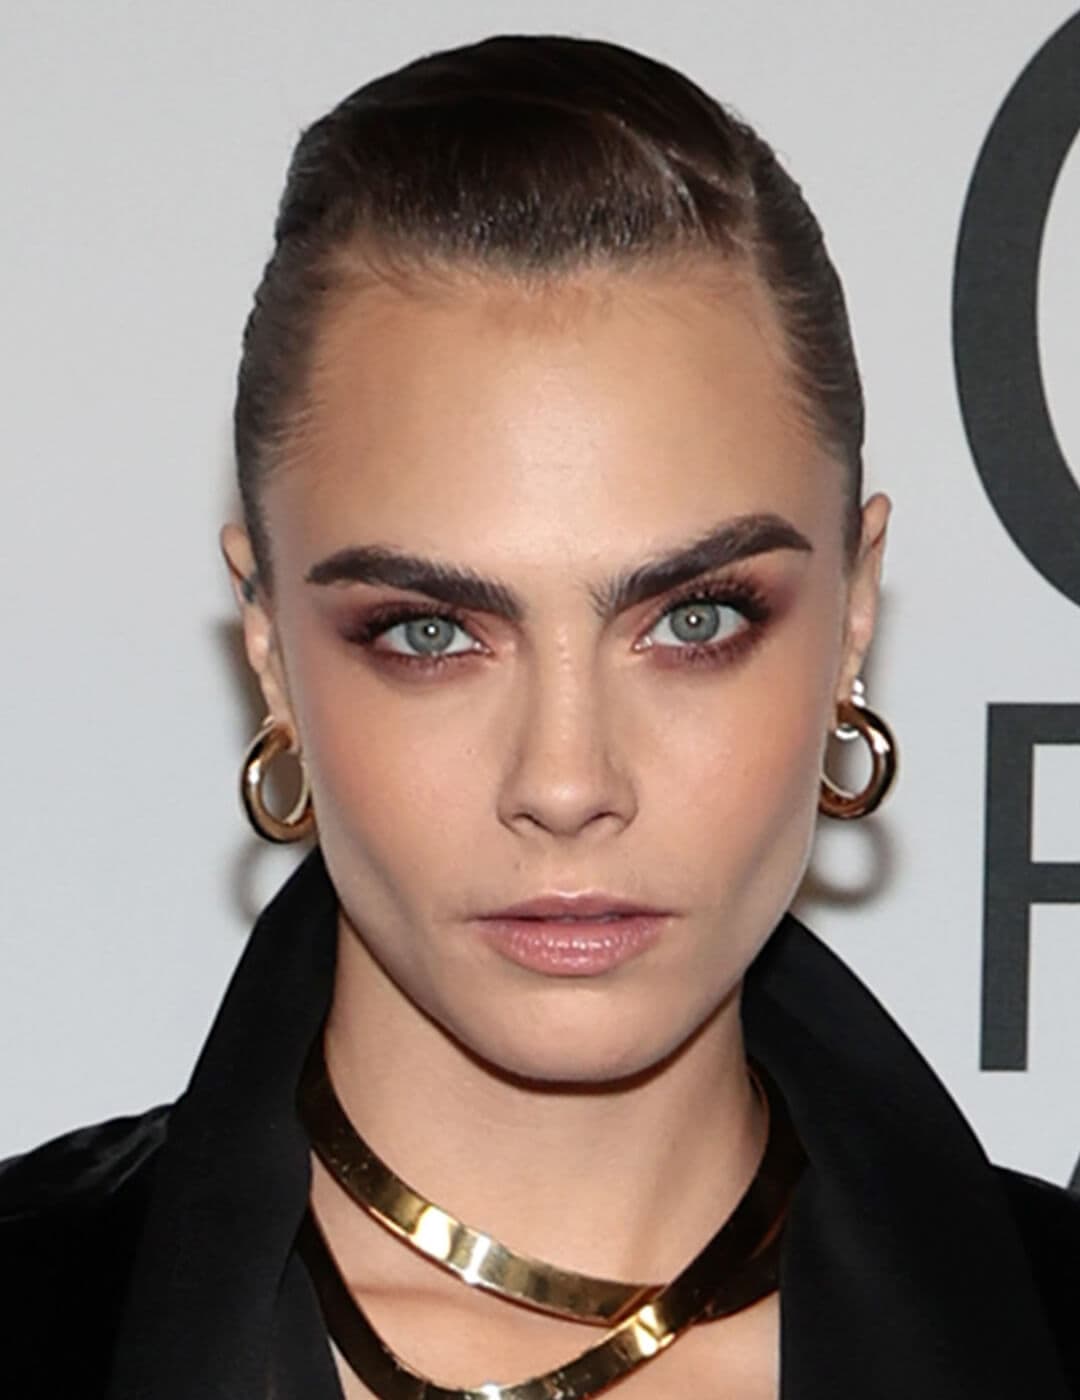 A picture of Cara Delevingne wearing gold necklace and earrings with brown-shade eyeshadow